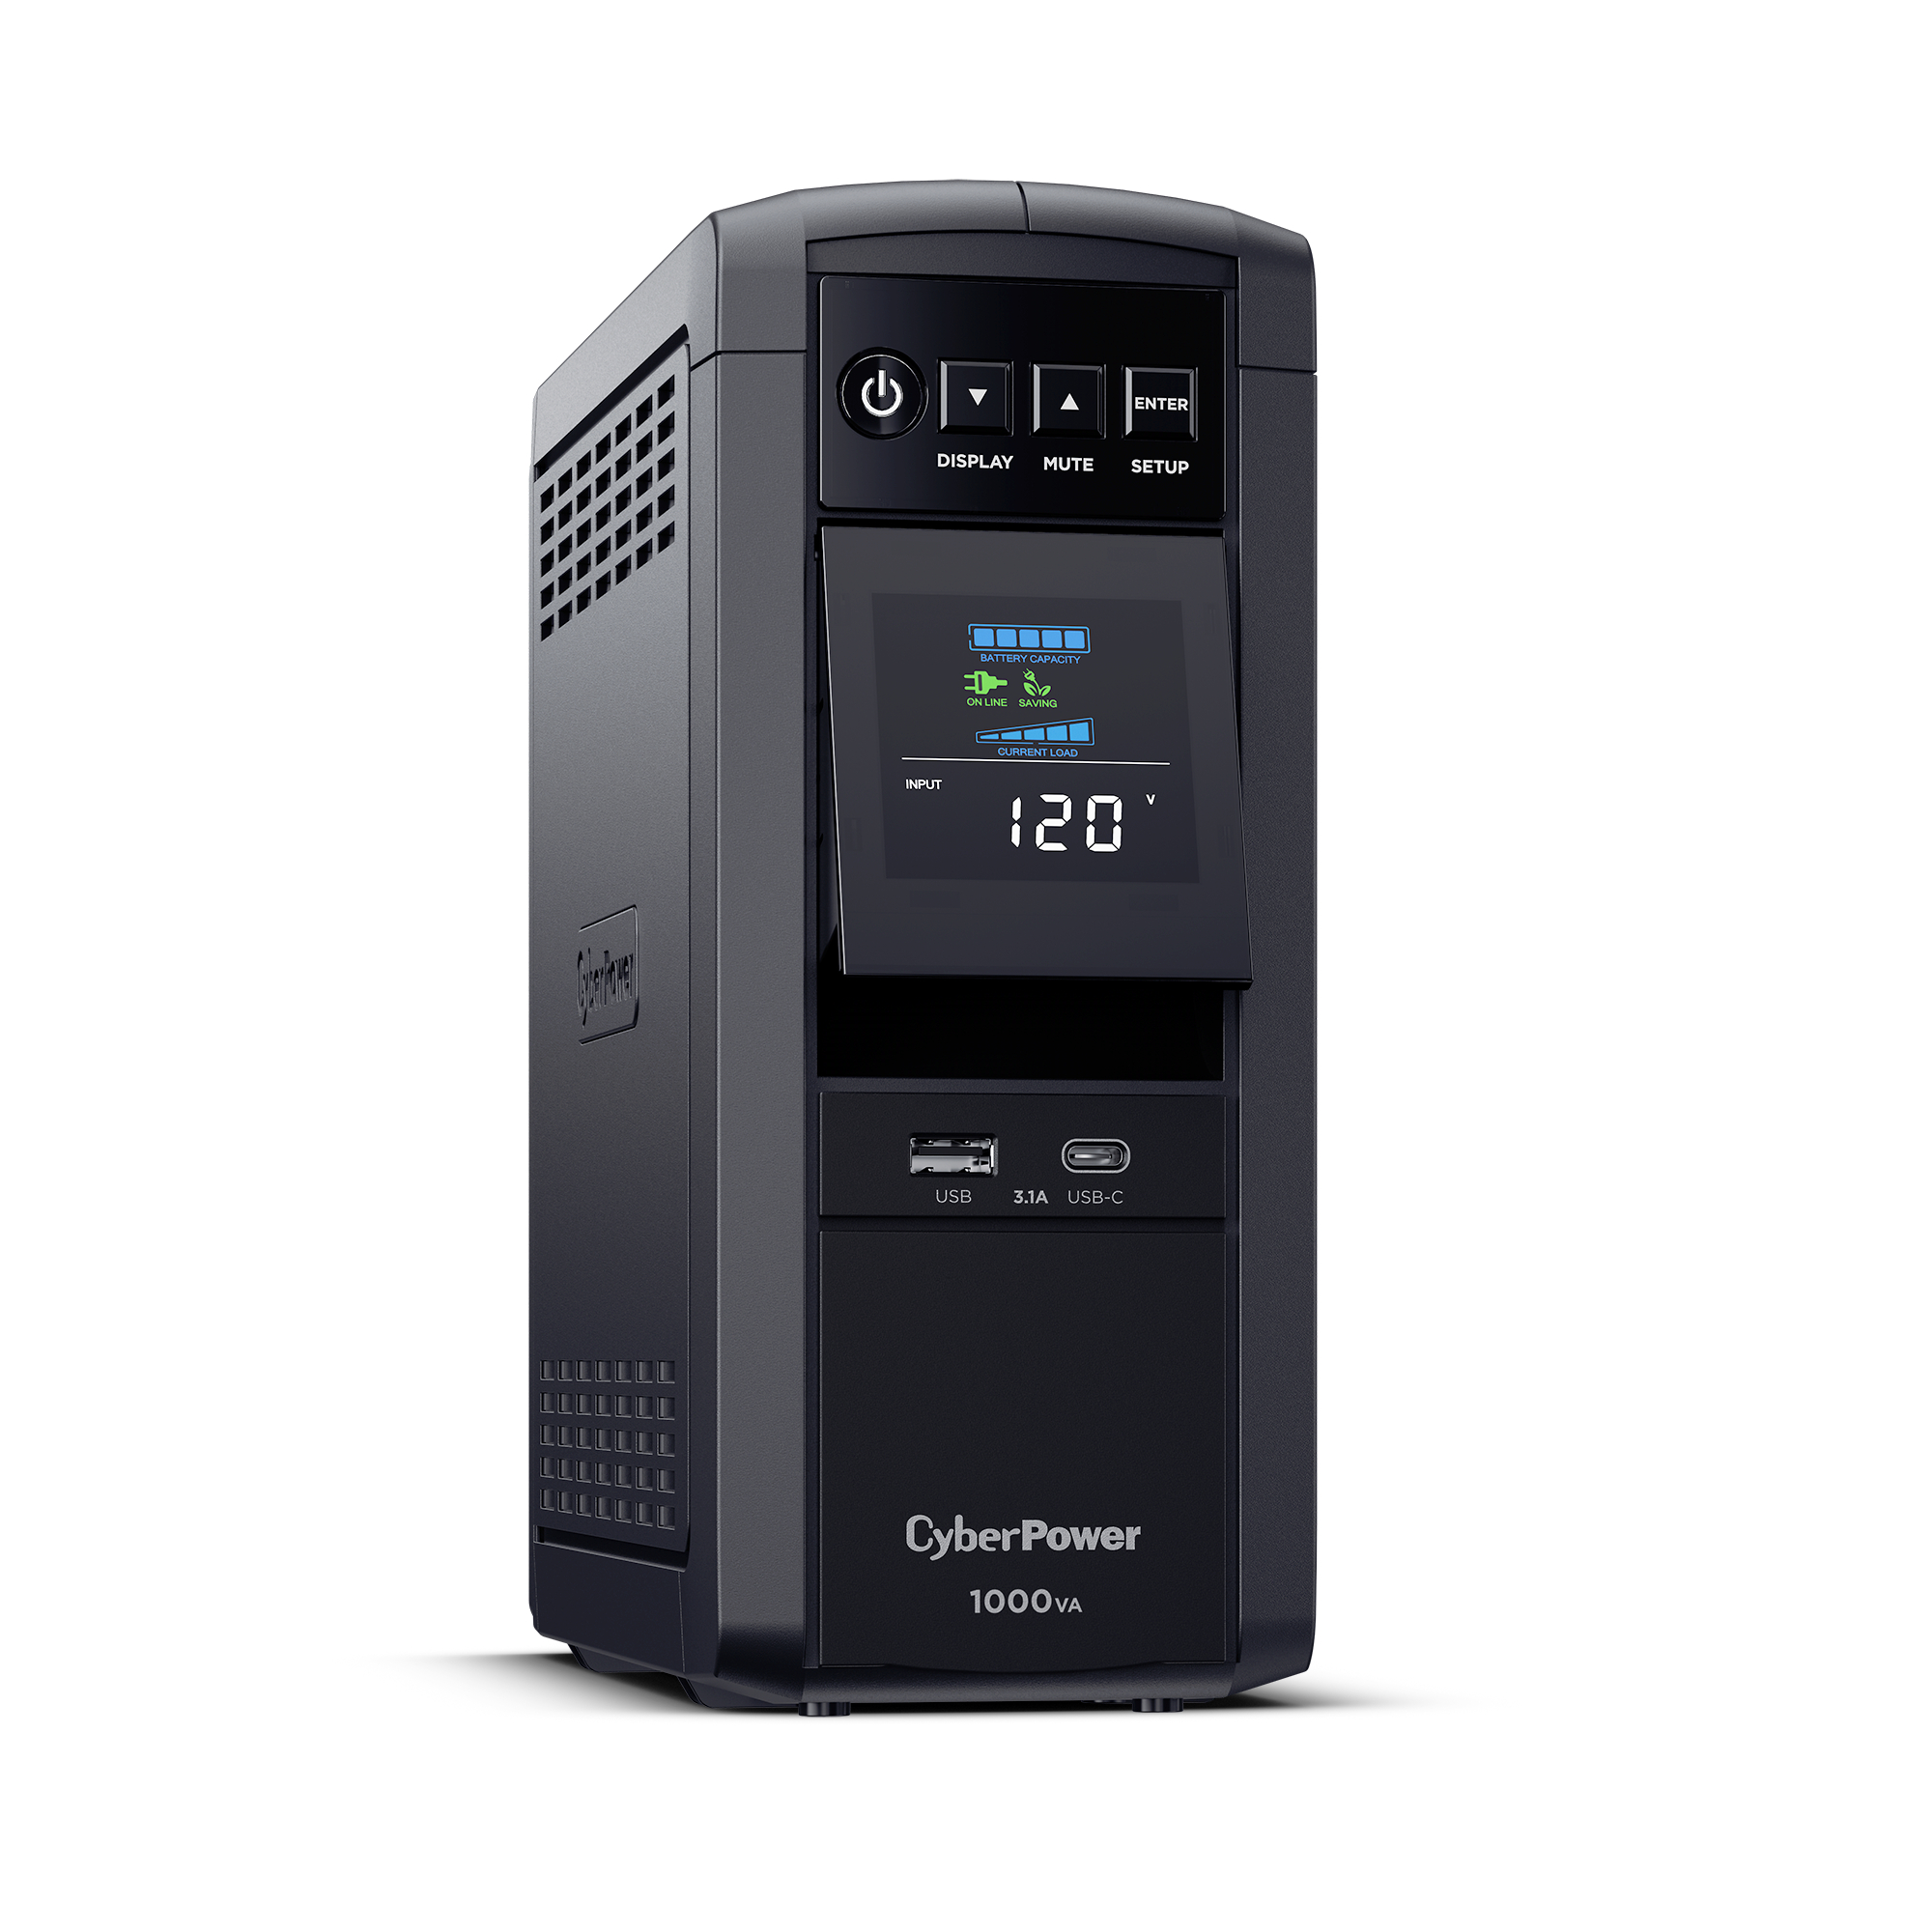 CP1000PFCLCD PFC Sinewave UPS Series Product Details, Specs, Downloads  CyberPower